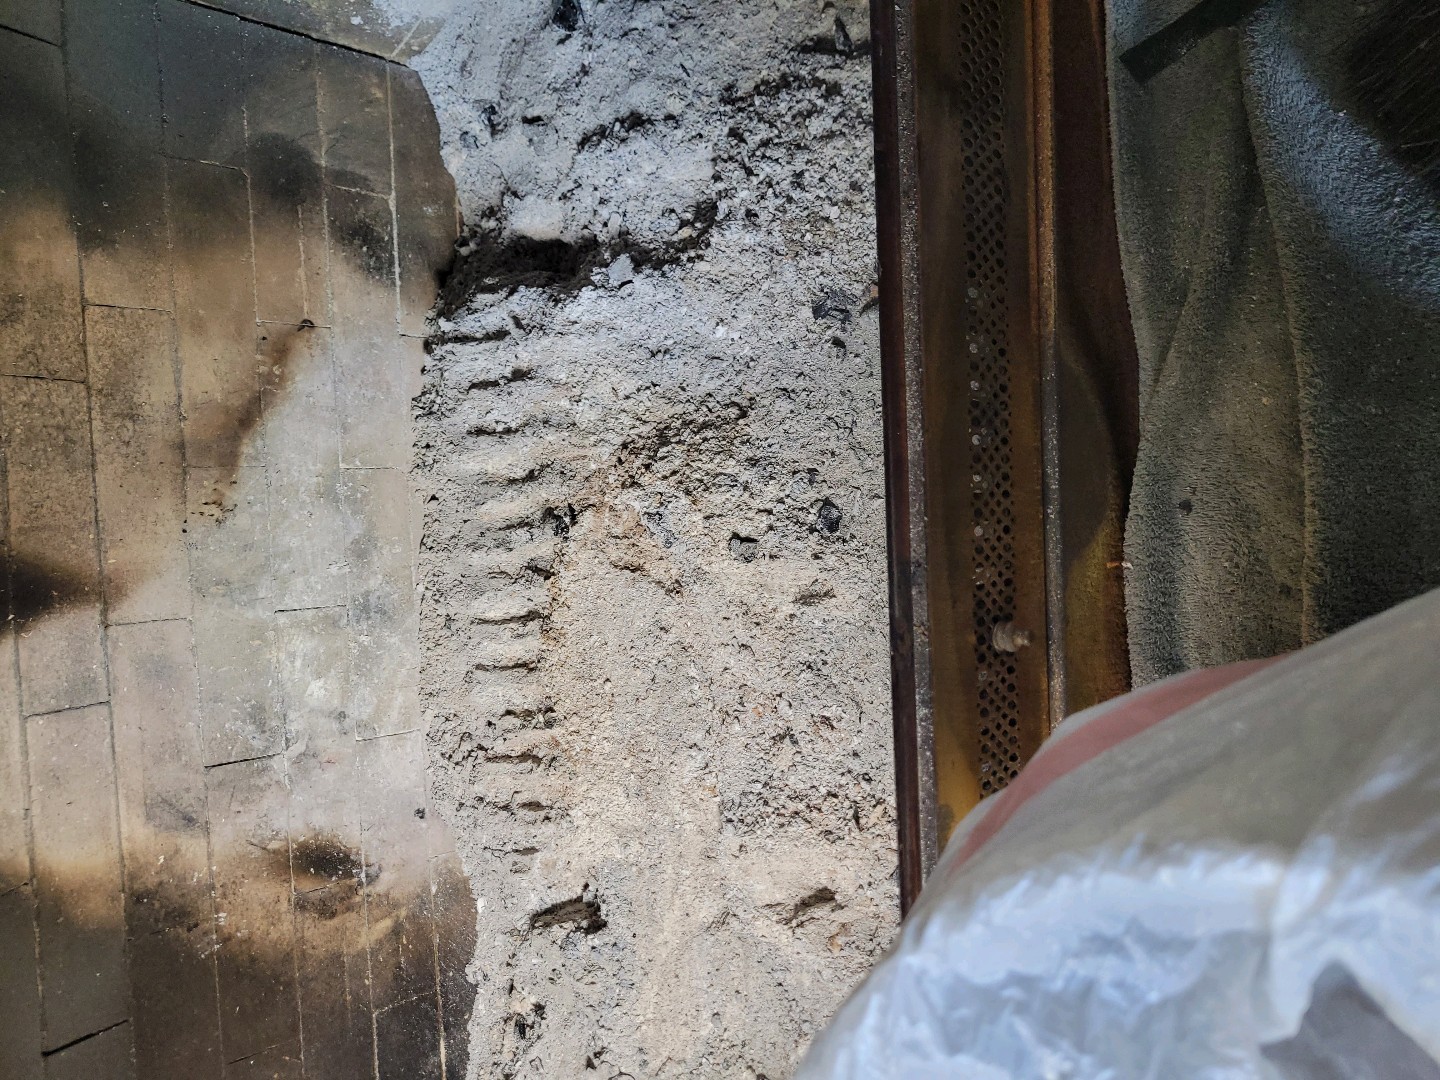 Accumulation of ash and debris inside a fireplace